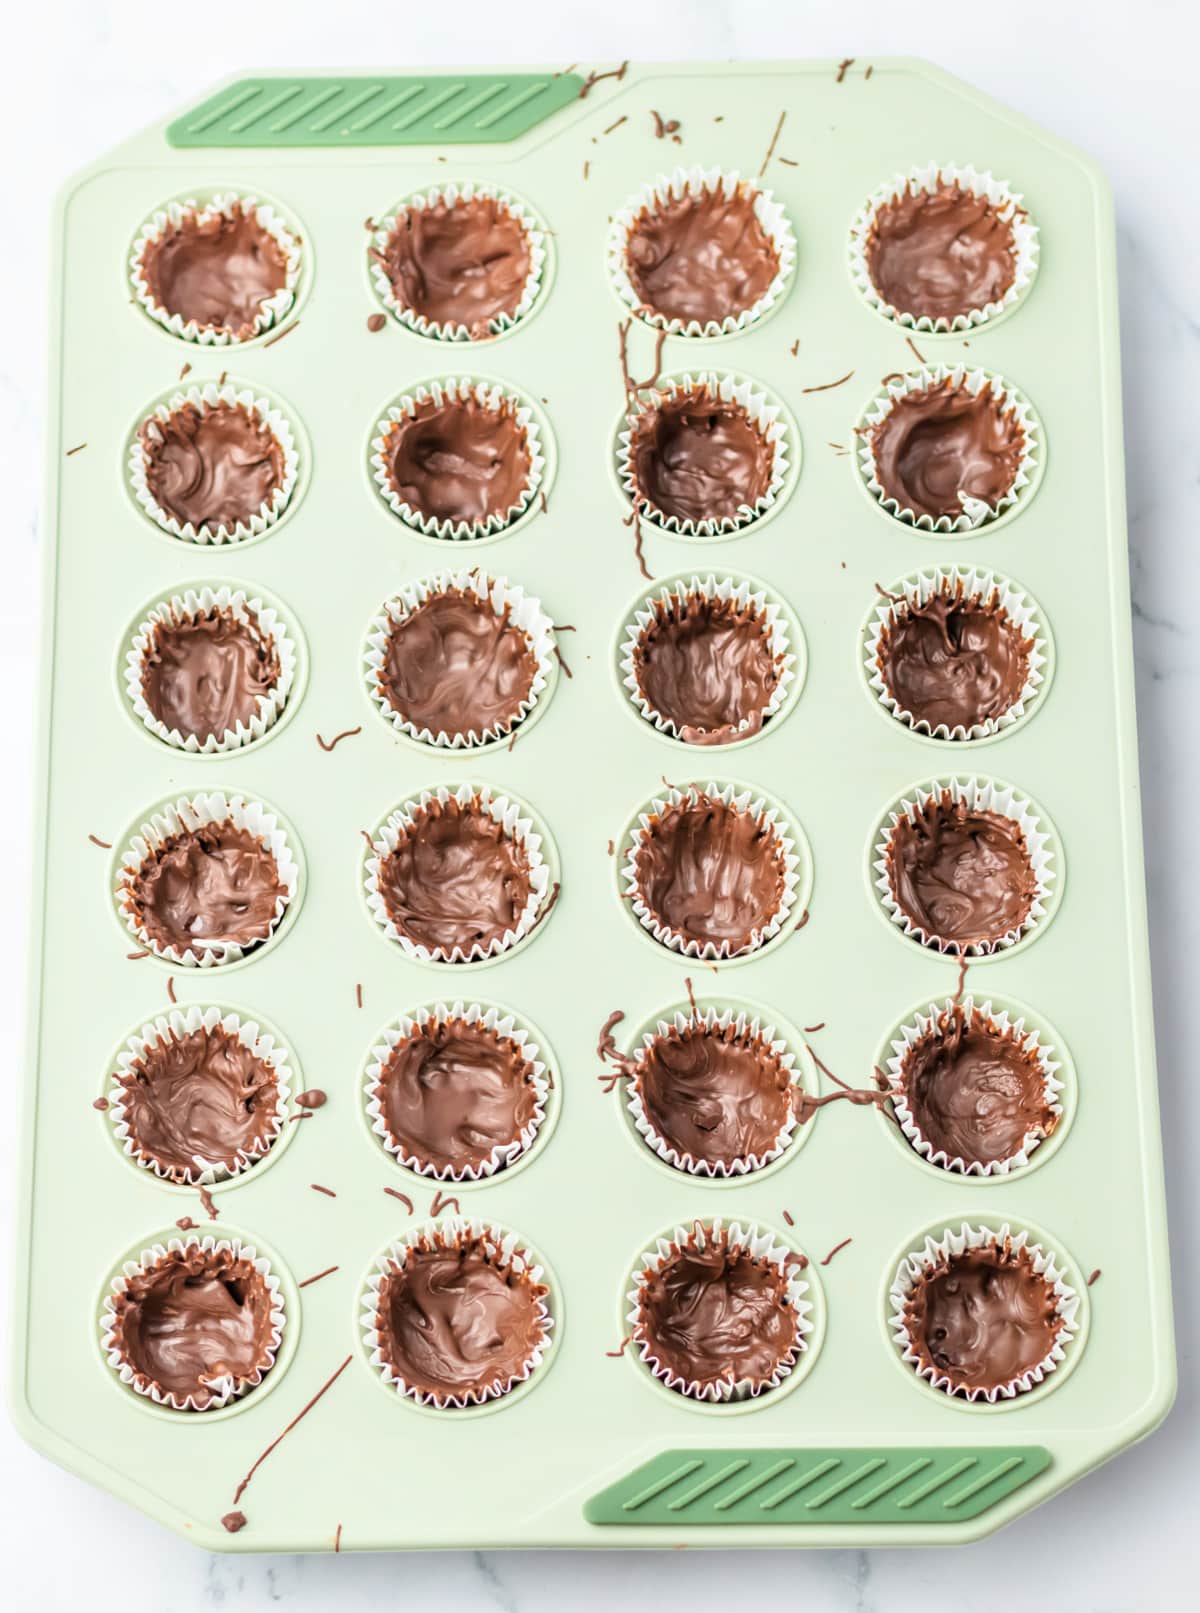 Coating muffin liners with melted chocolate.